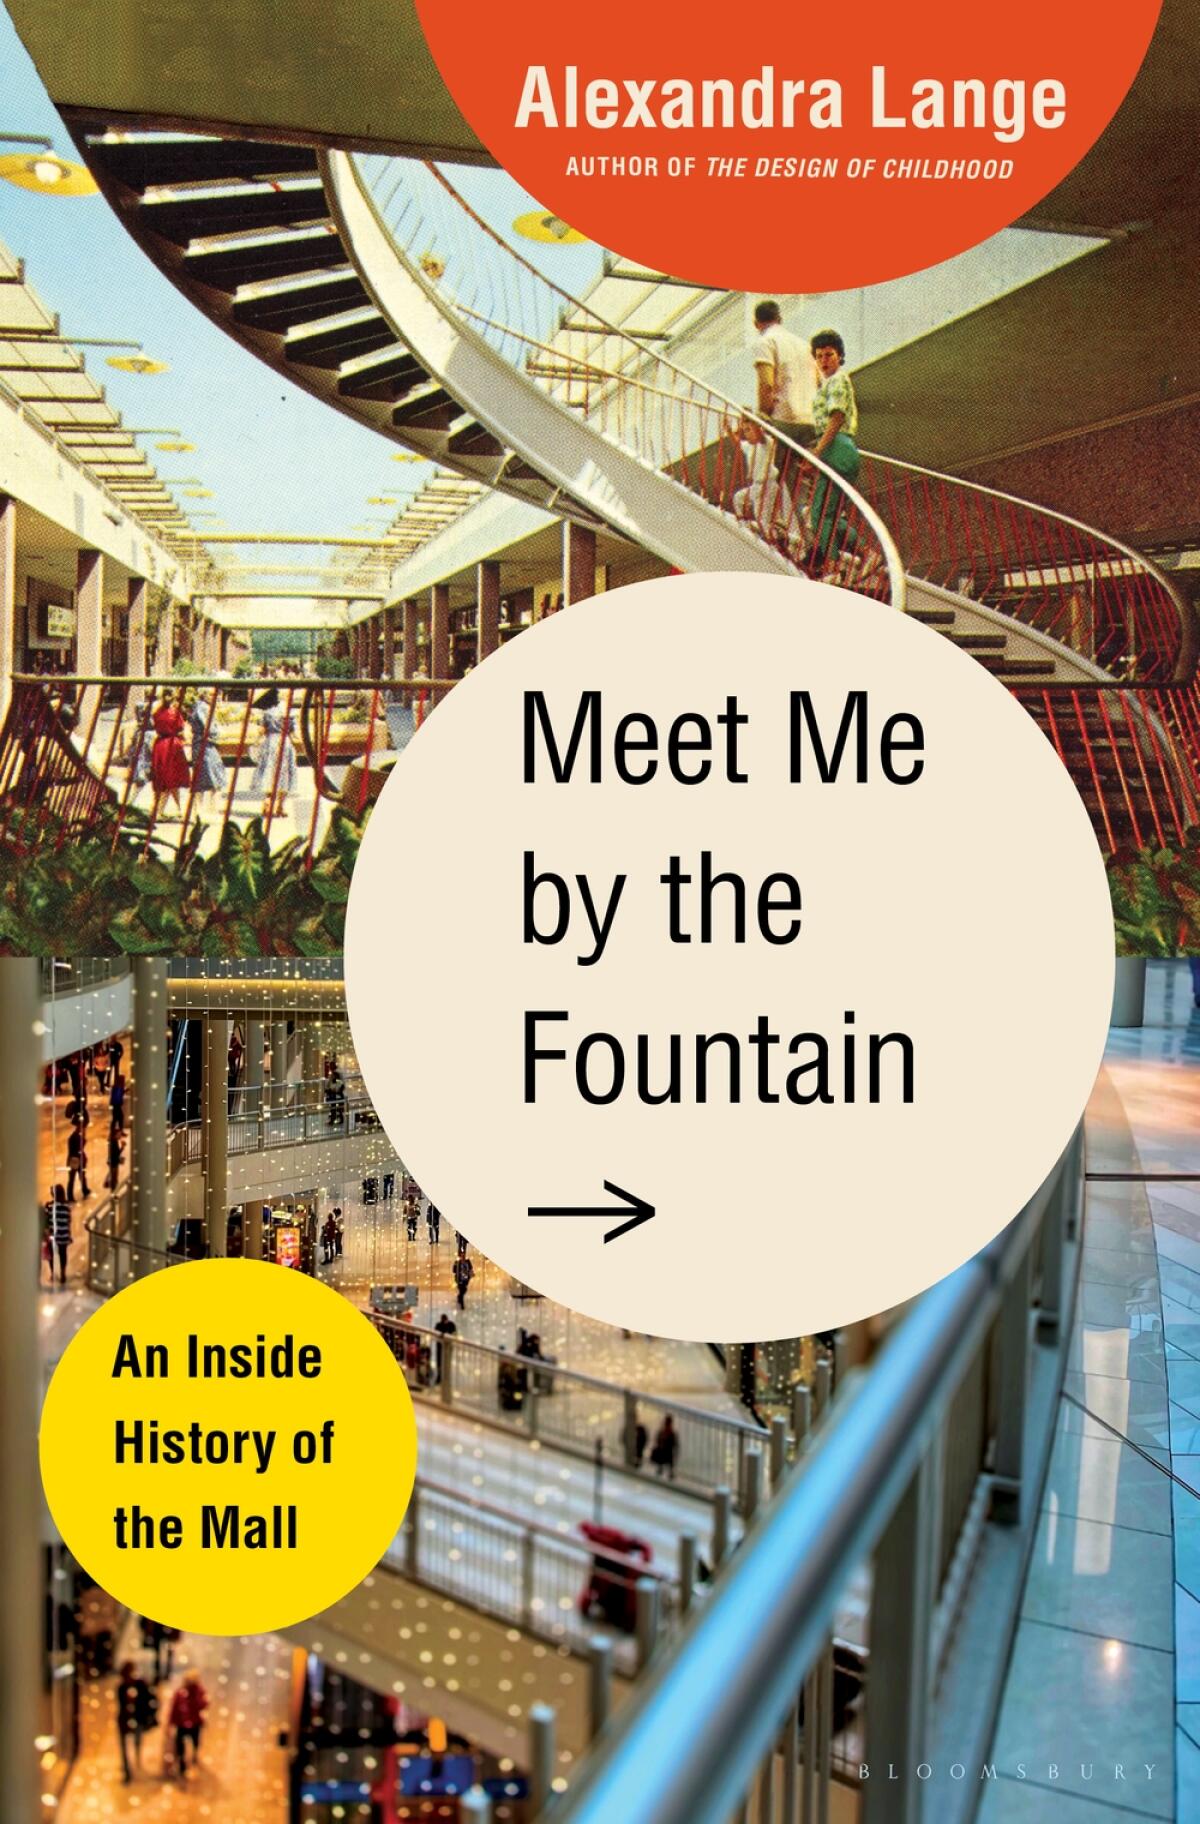 The cover of Alexandra Lange's "Meet Me by the Fountain" shows a mall atrium with curving staircase